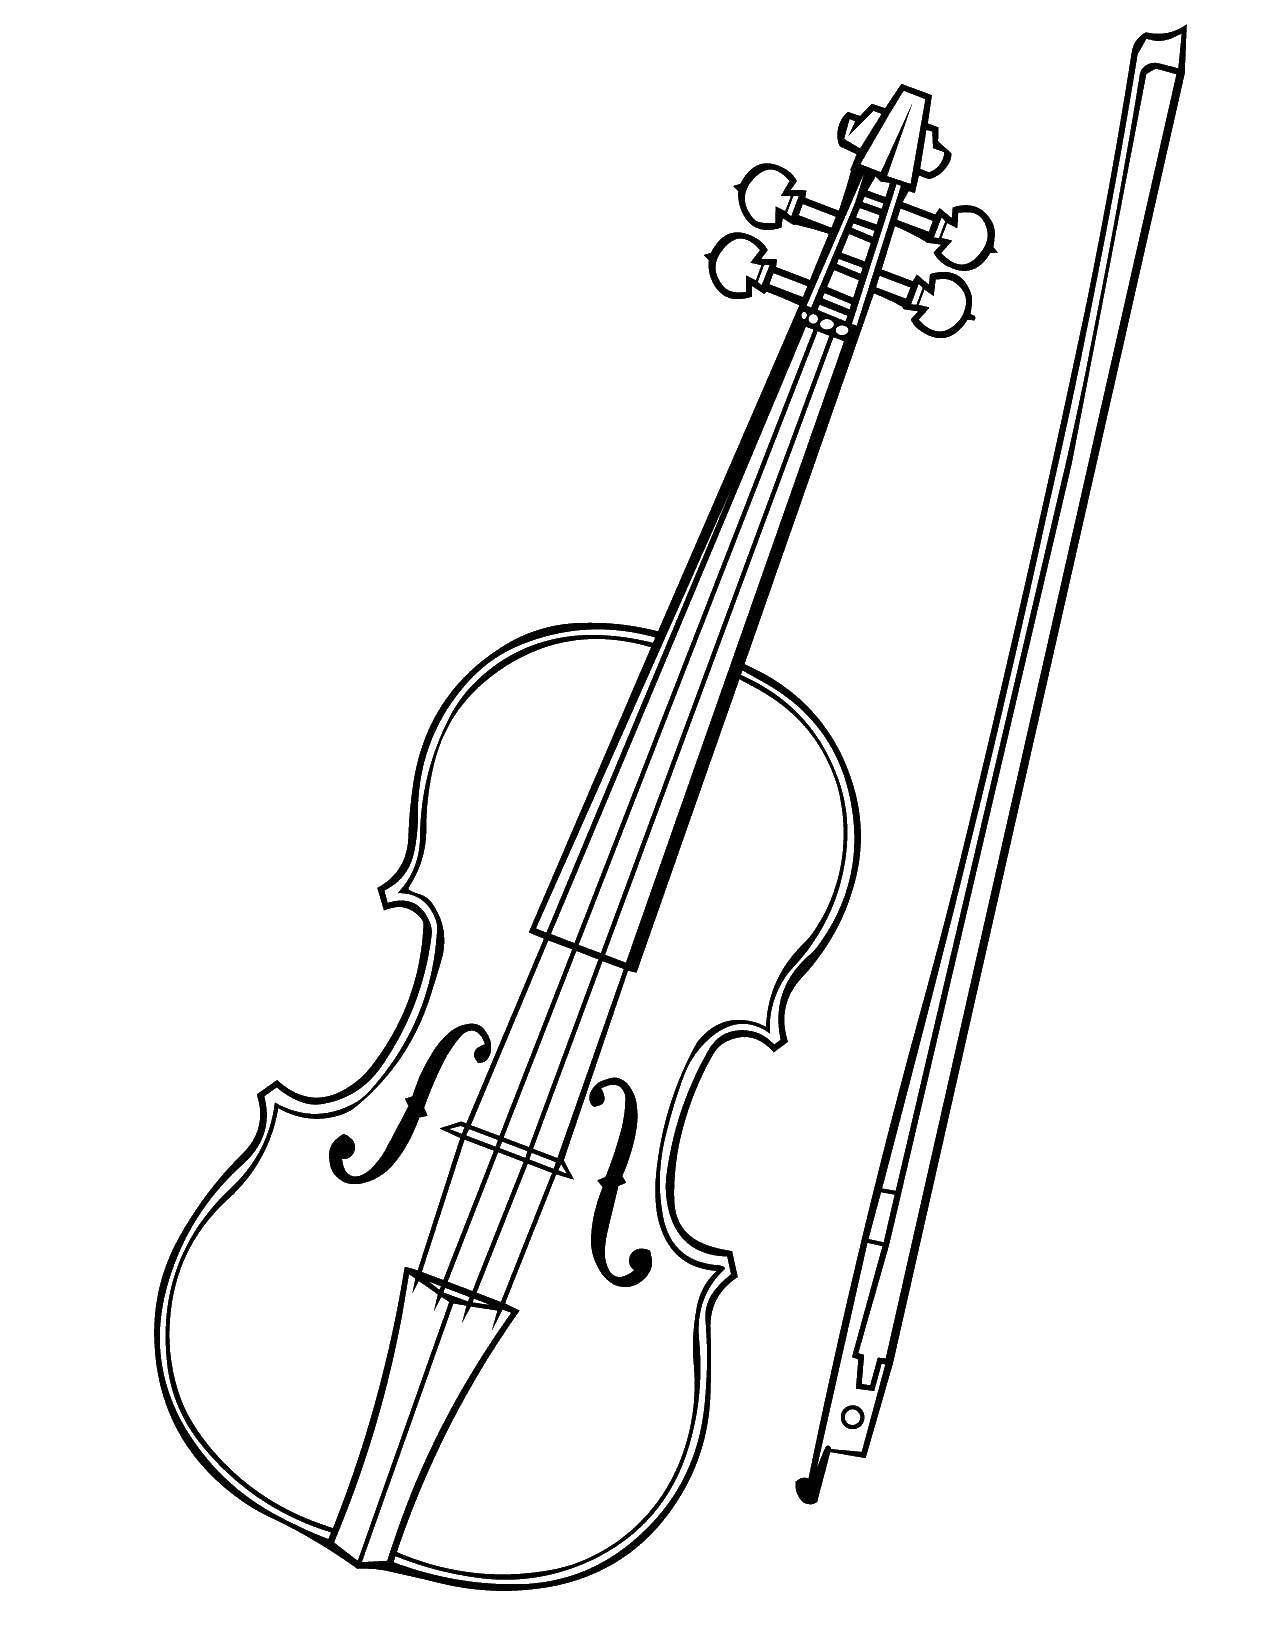 Coloring Violin. Category Music. Tags:  music, instruments, violin.